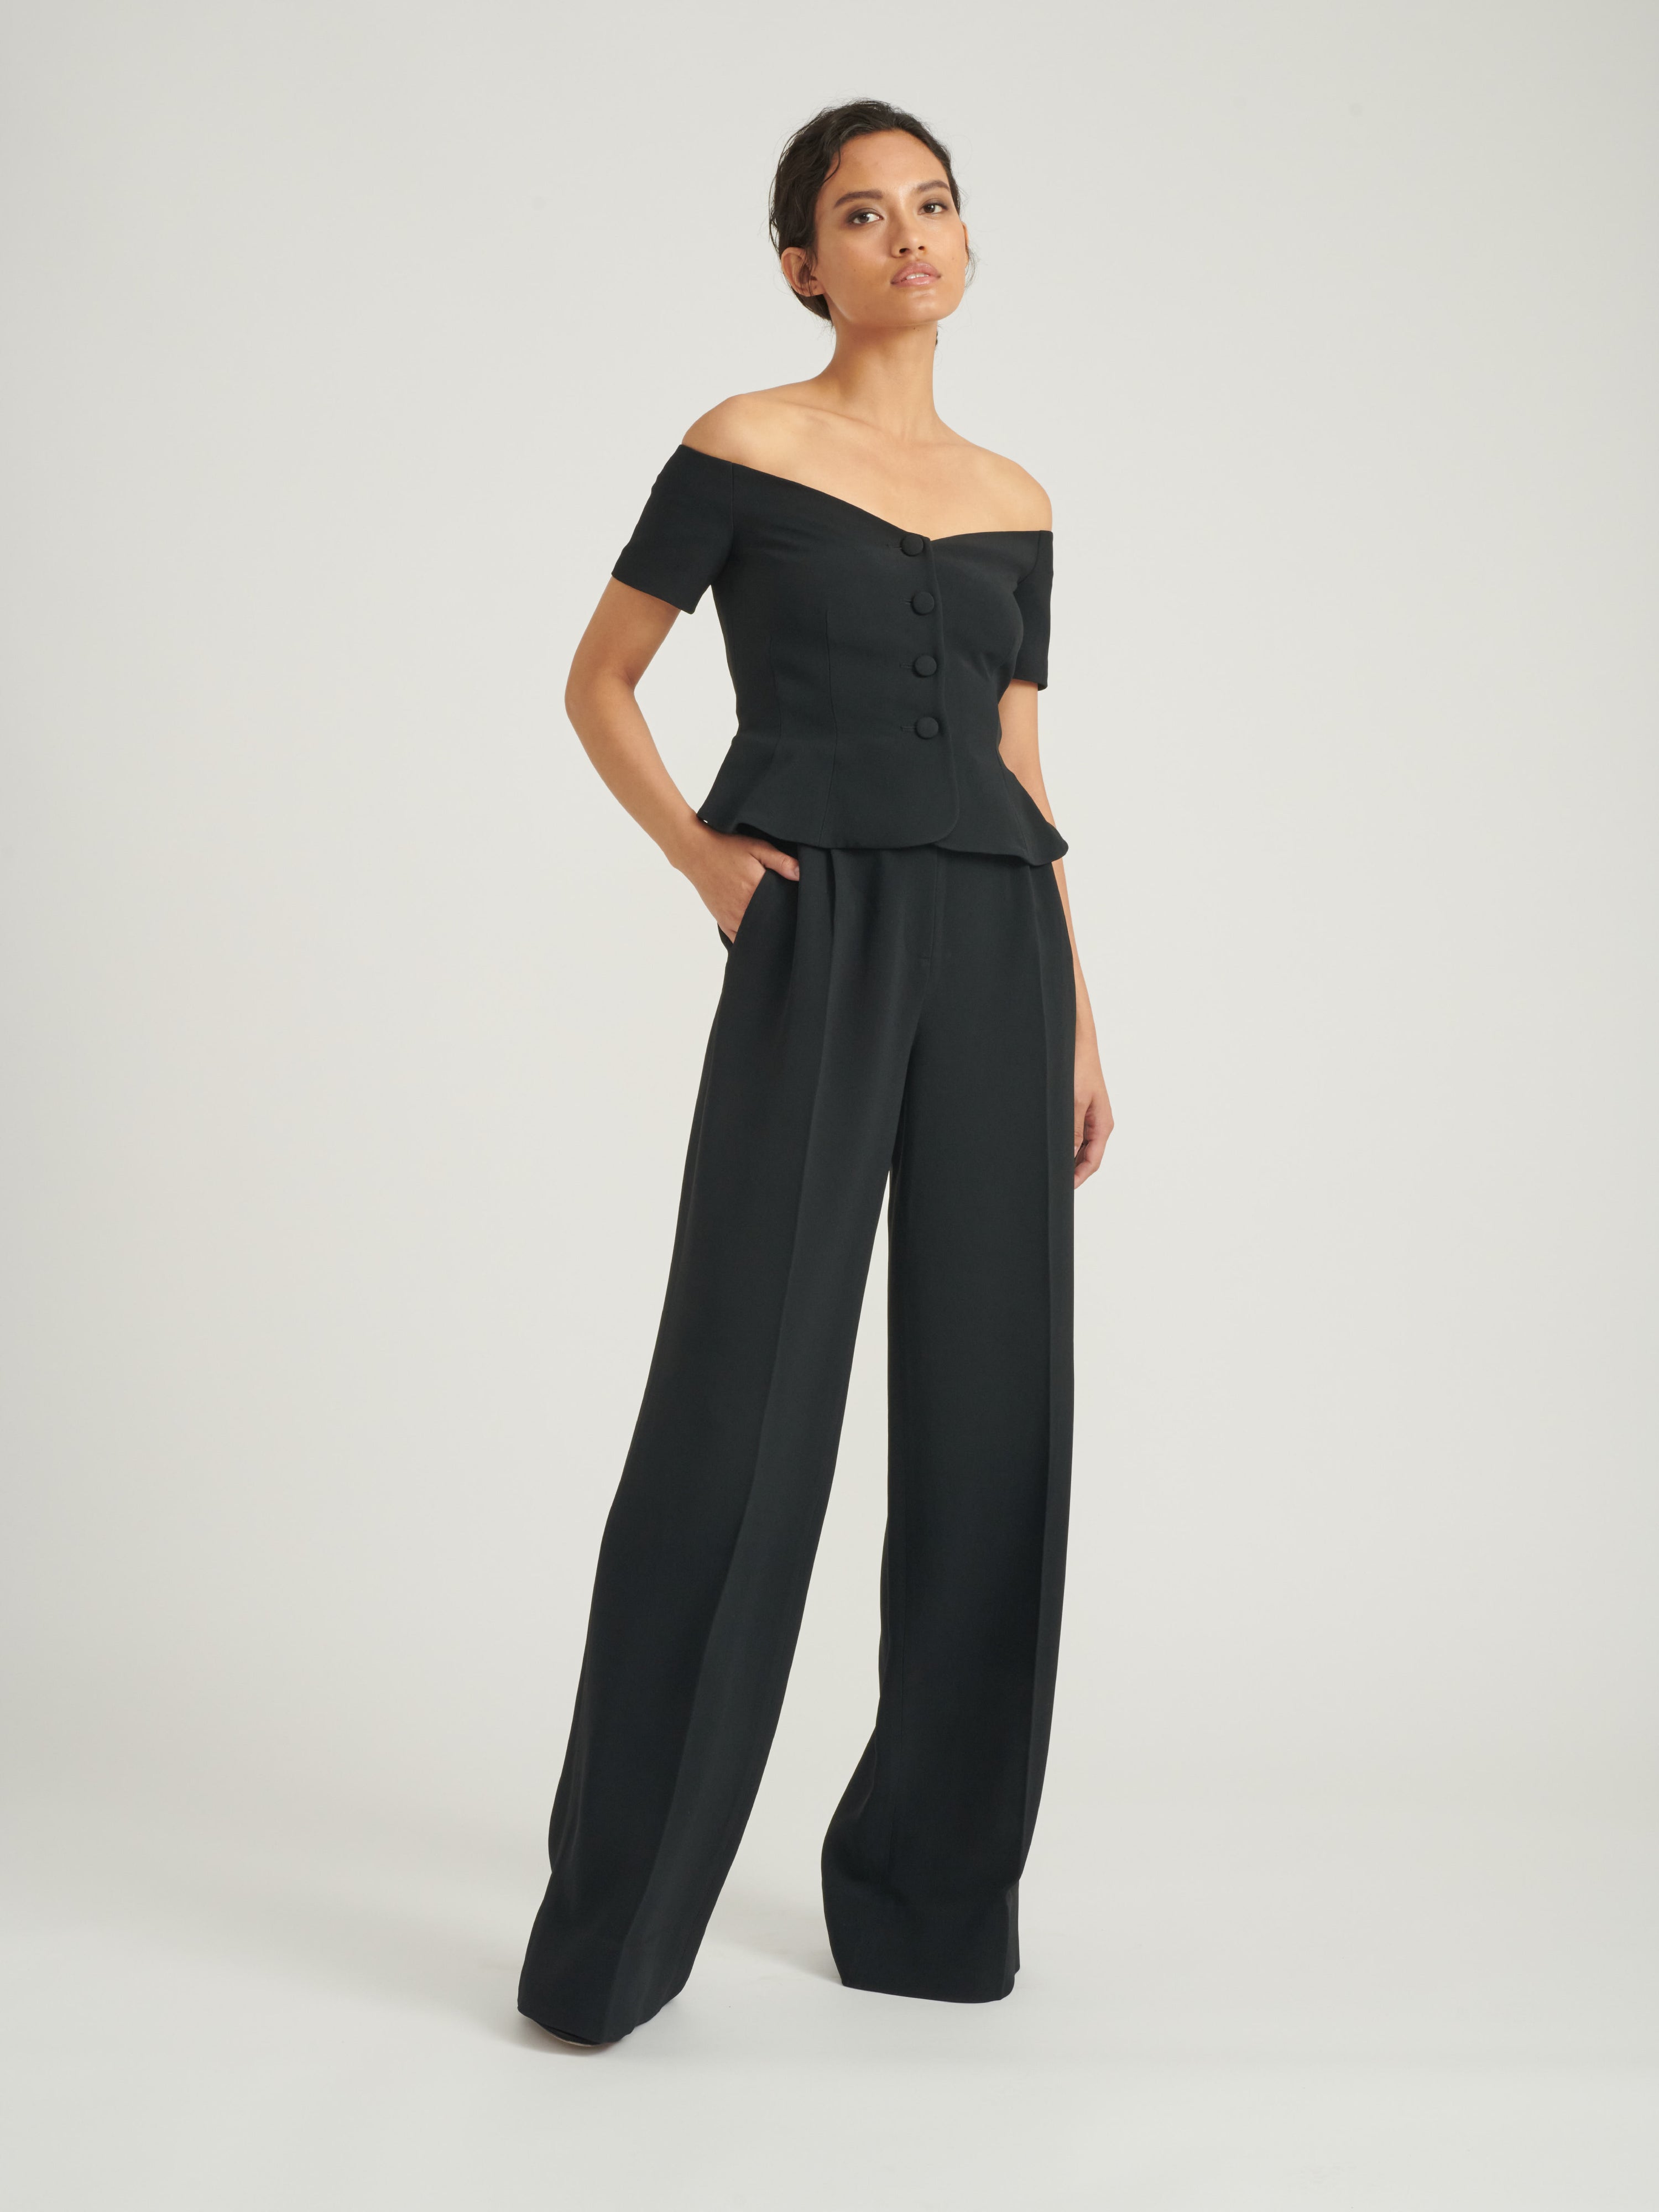 Wide Tailored Trouser in Black